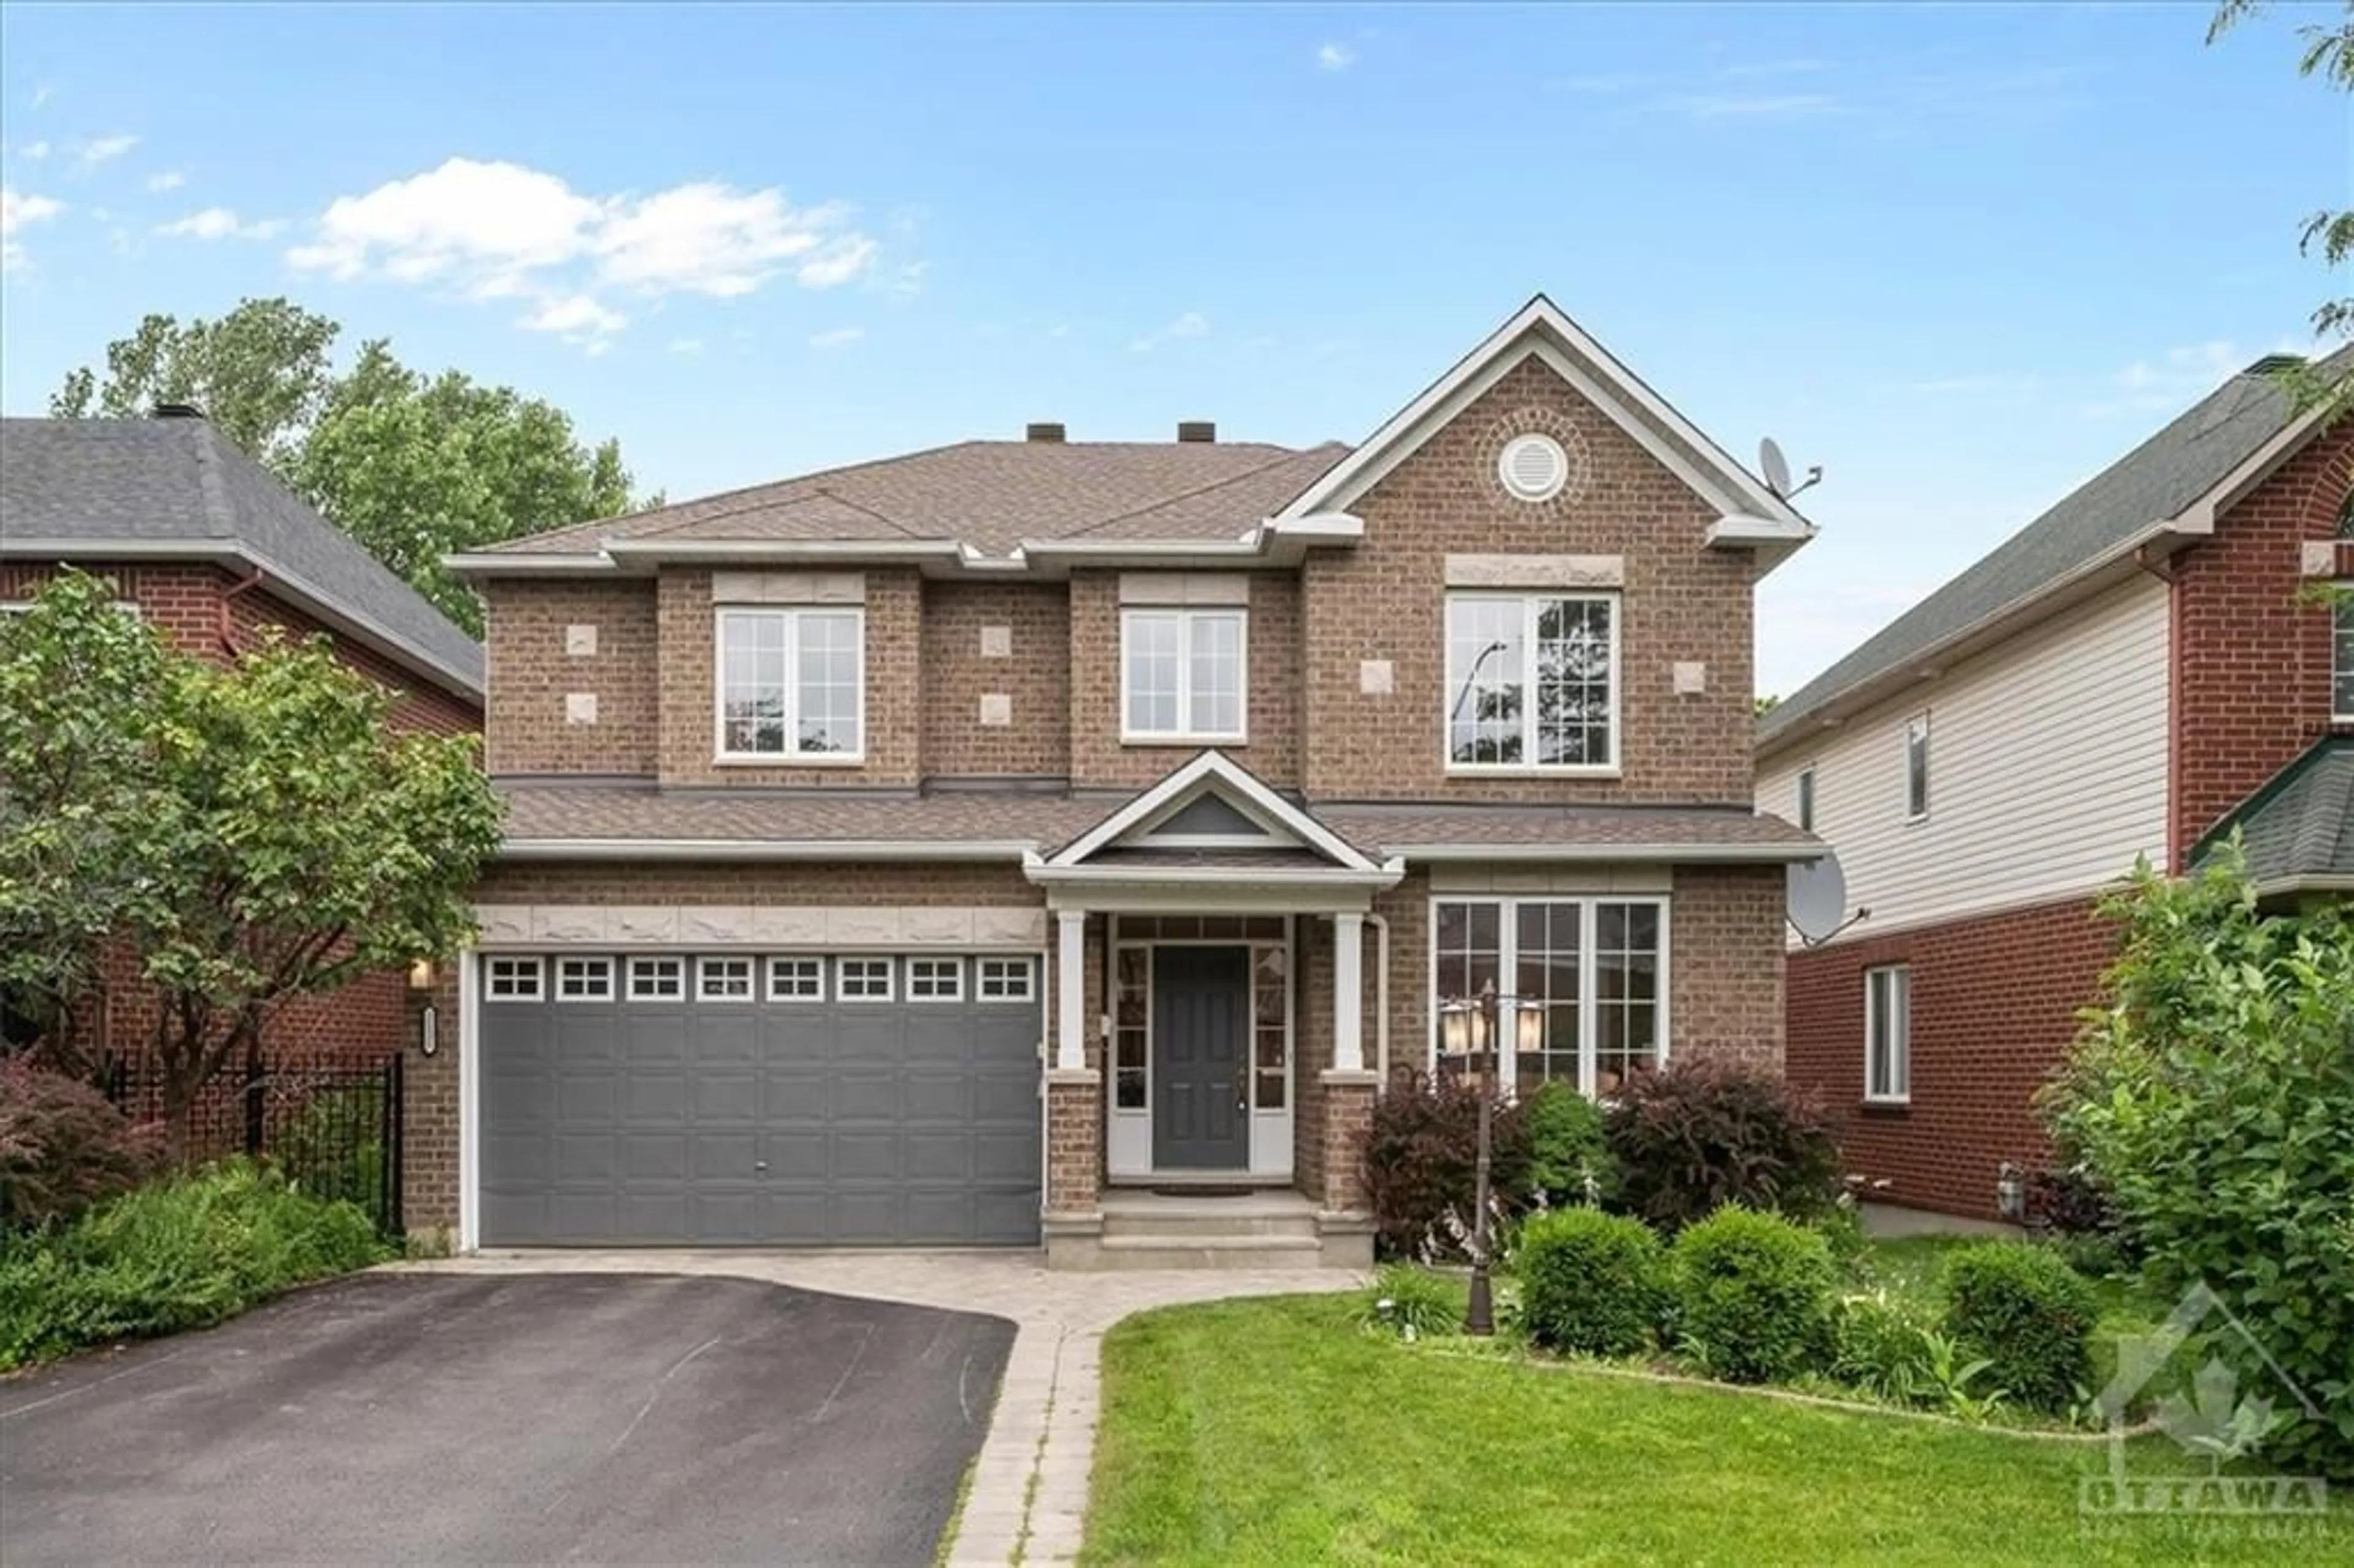 Home with brick exterior material for 2121 BLUE WILLOW Cres, Ottawa Ontario K1W 1K4